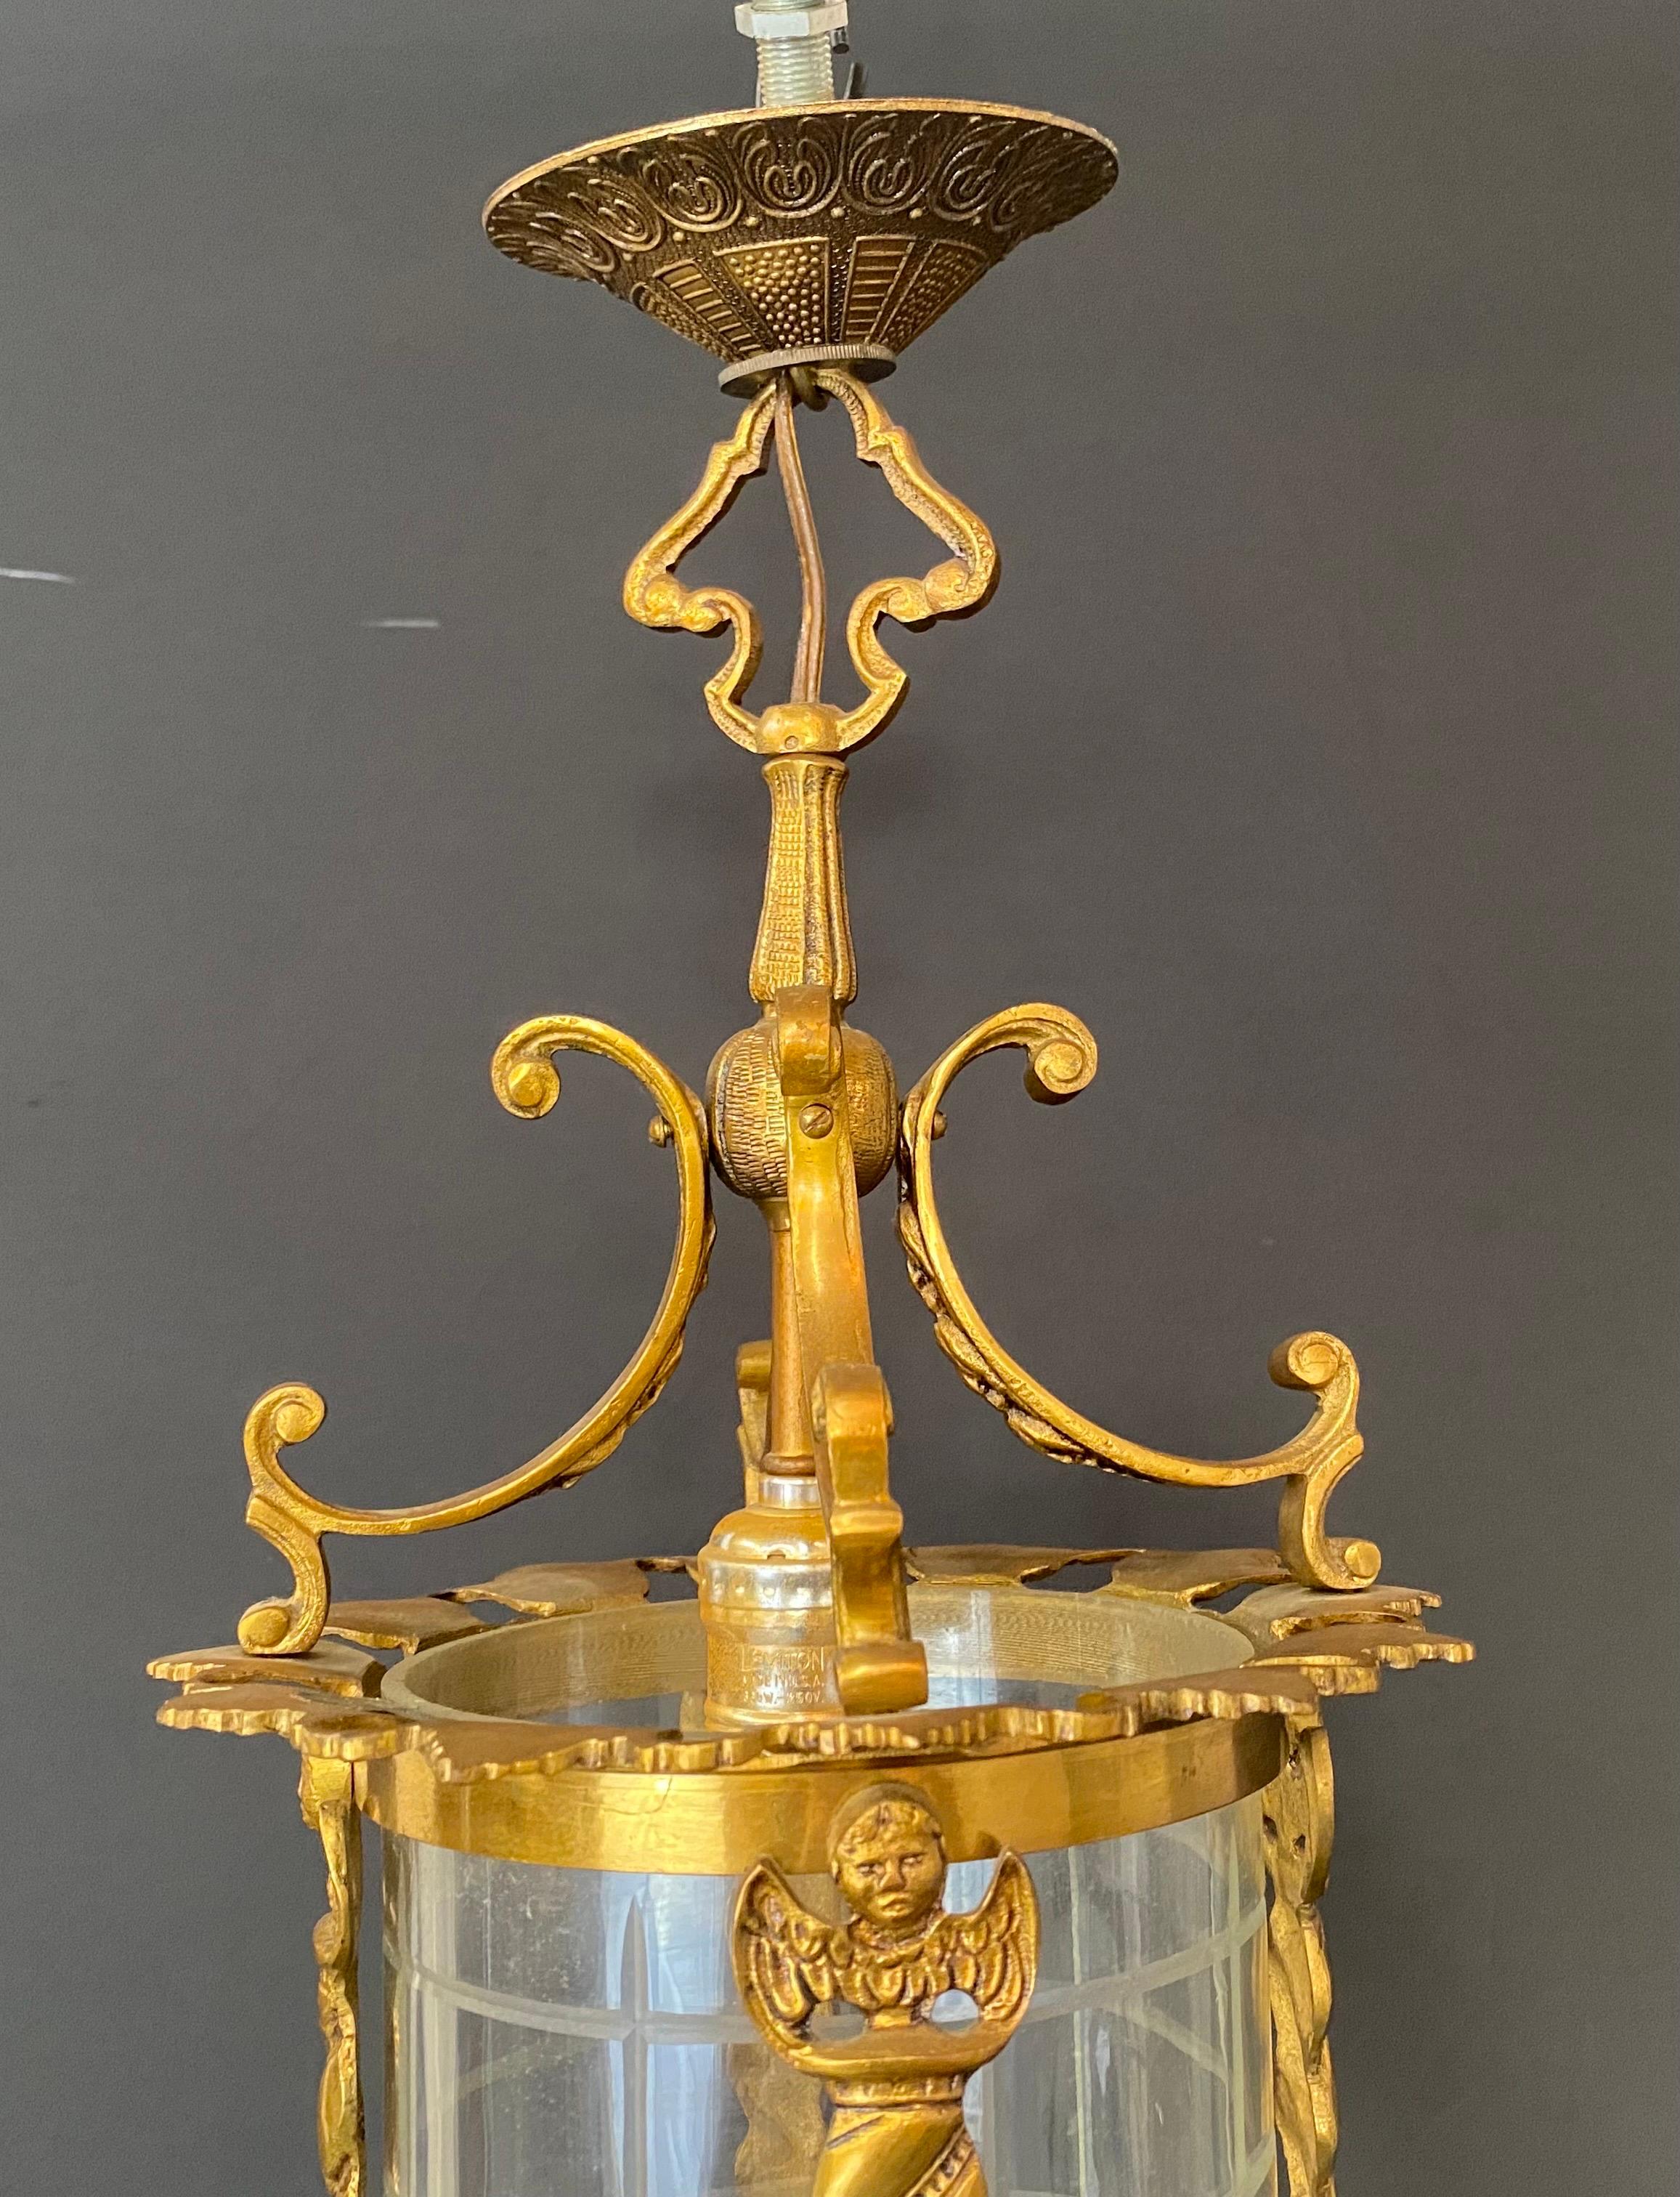 An exceptional Spanish neoclassical revival style lantern or pendant. The pendant is hand crafted of gilt iron in a cylindrical shape. Featuring  classical revival scrolls ad leaves design, the pendants shows four figural design of winged angels on